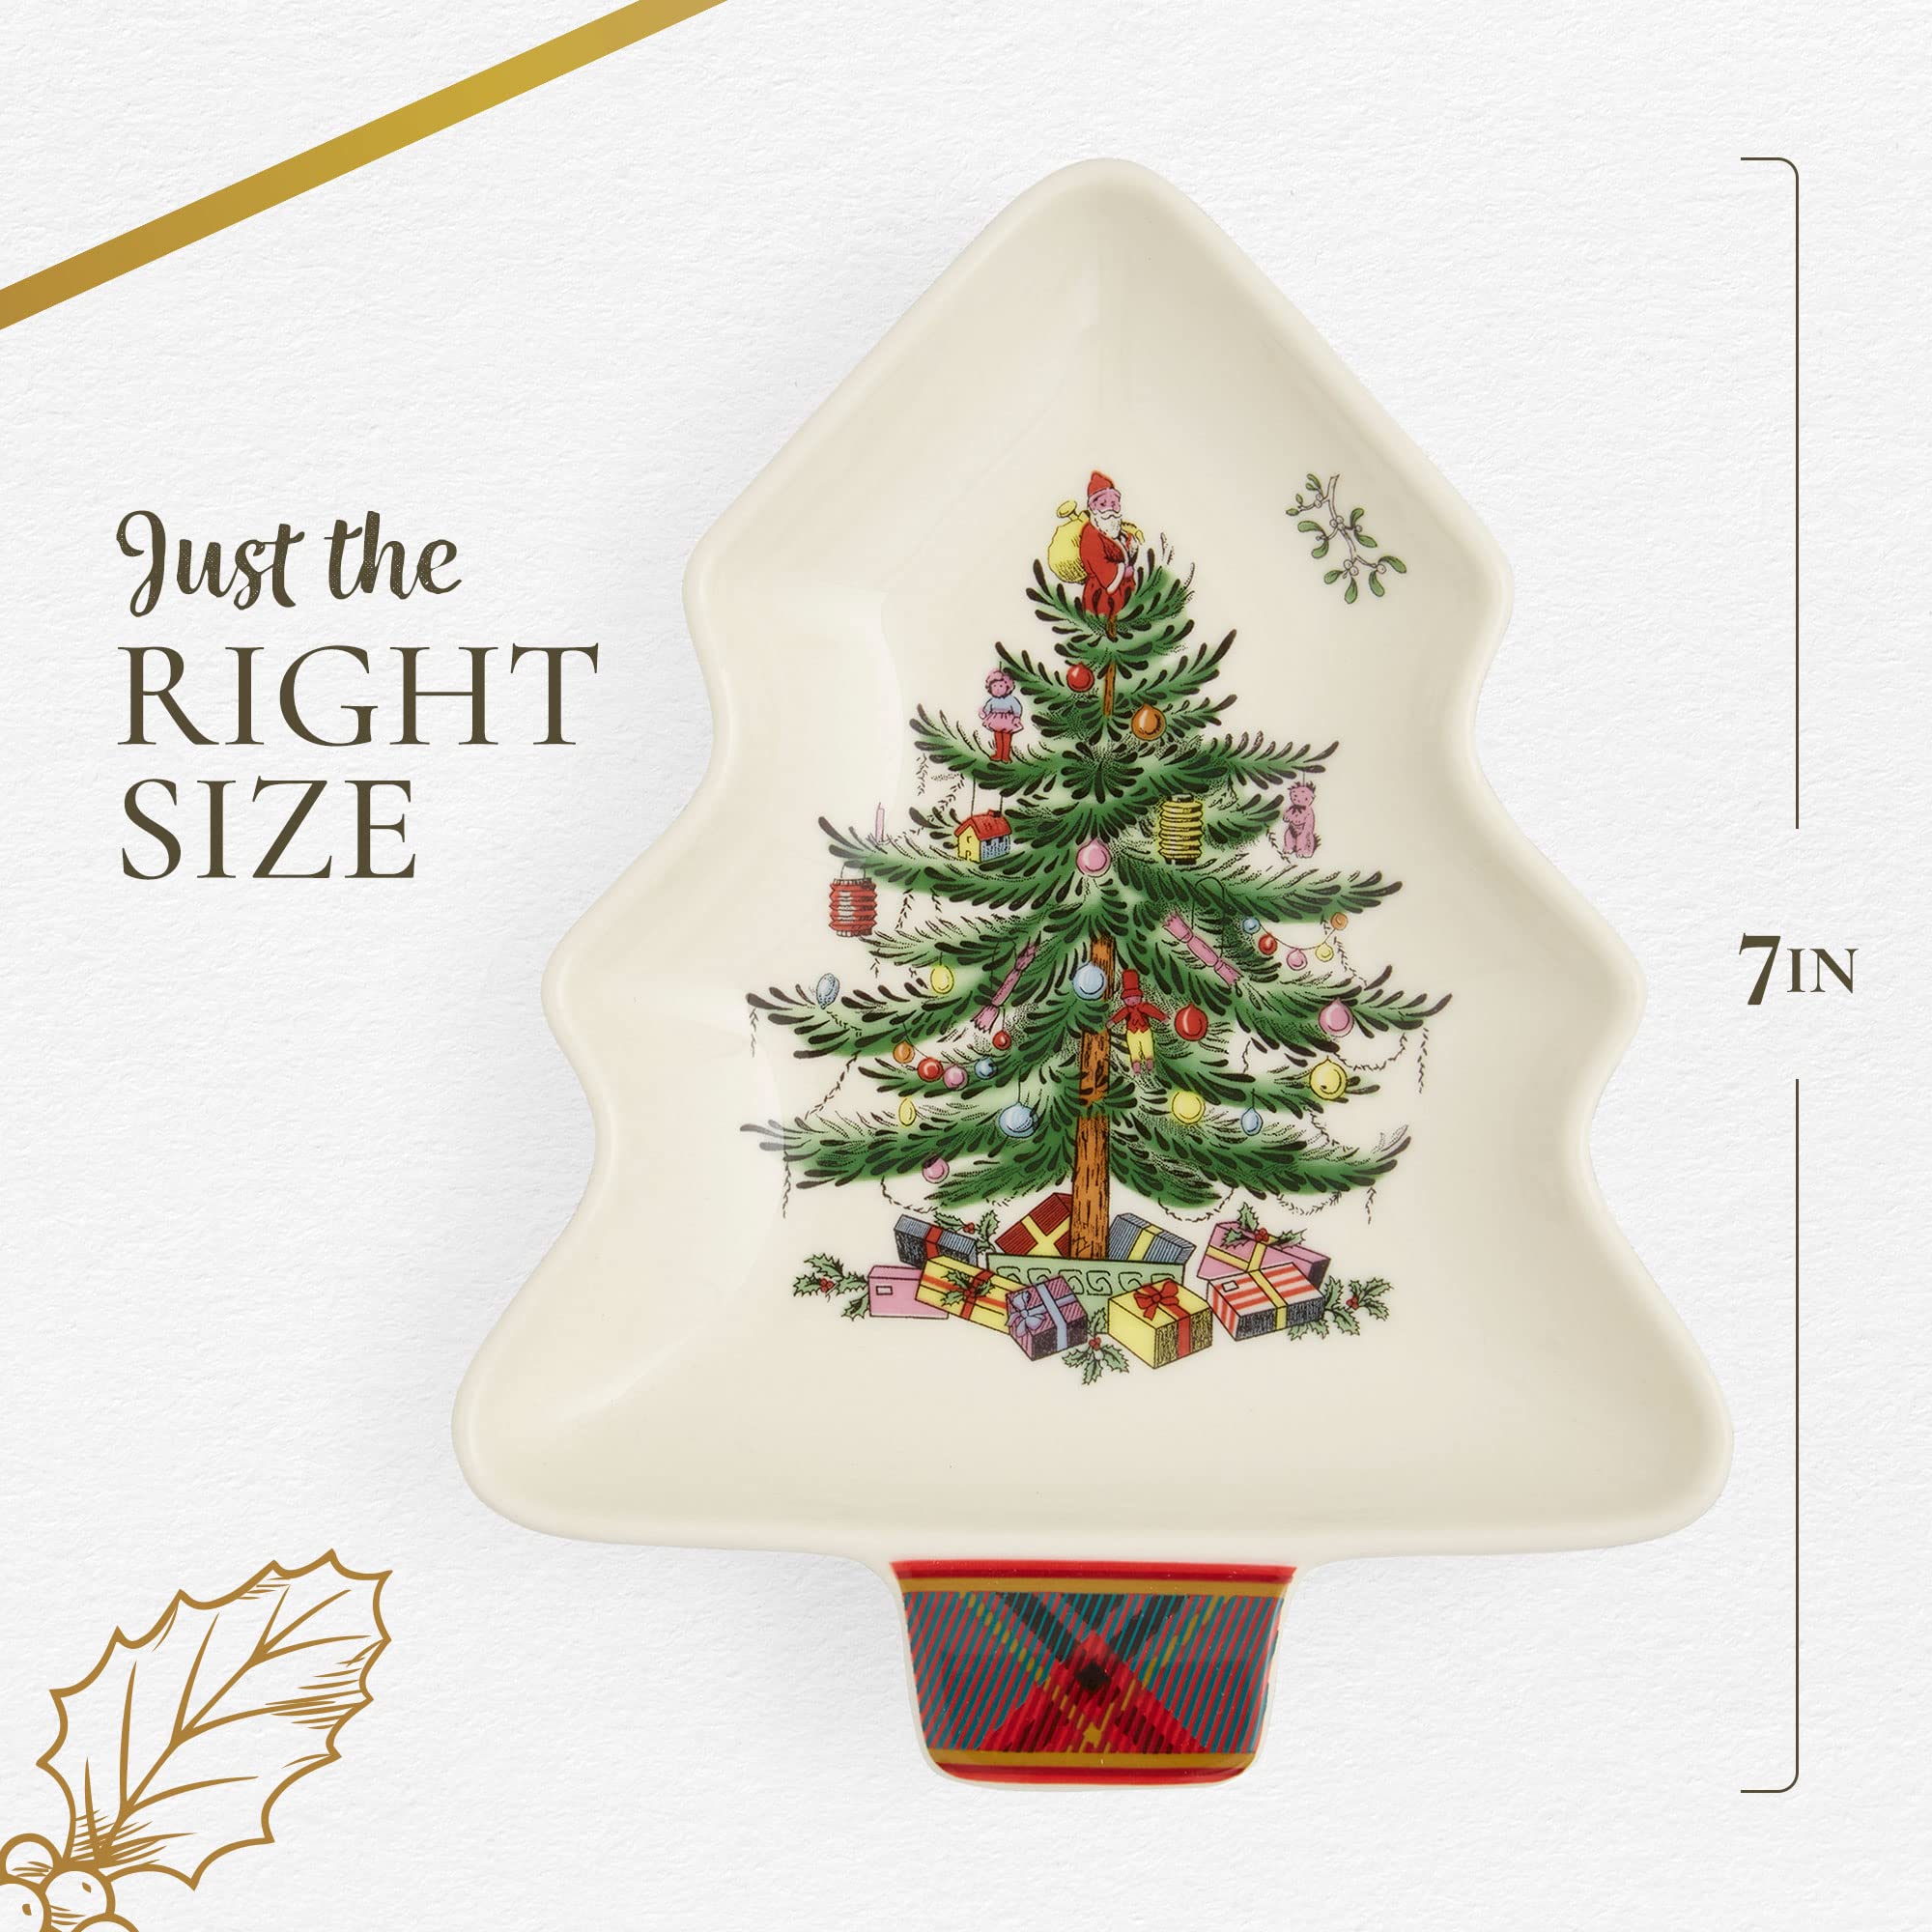 Spode Christmas Tree Tartan Spoon Rest | 7 – Inch Tree Shaped Cooking Utensil Rest | Spatula Ladle Holder for Kitchen Countertop | Made of Fine Porcelain Dishwasher Safe